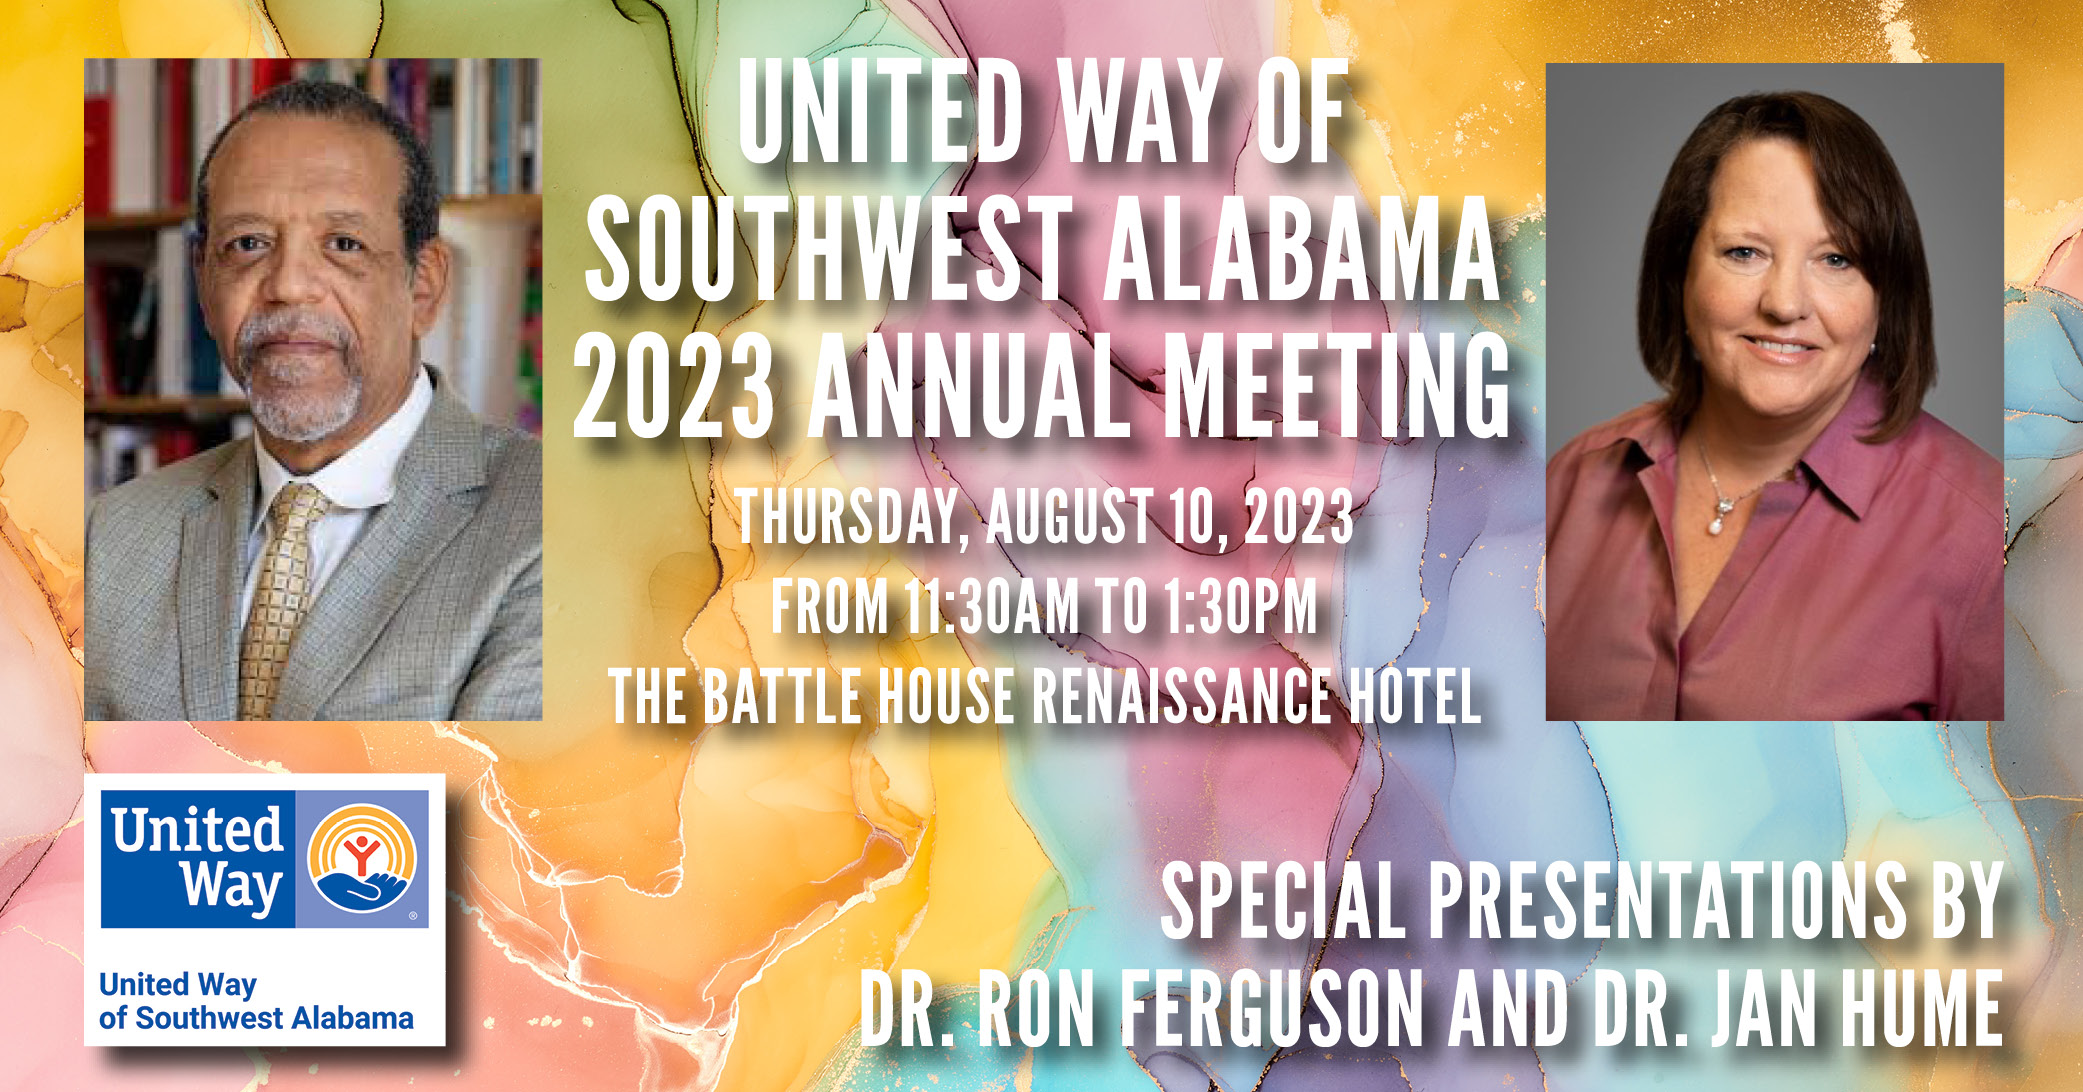 United Way of Southwest Alabama 2023 Annual Meeting with Dr. Ron Ferguson, the Basics Founder & President and Dr. Jan Hume, Acting Secretary of the Alabama Department of Early Childhood Education (ADECE). Thursday, August 10, 2023 from 11:30AM to 1:30PM at The Battle House Renaissance Hotel Click to link to Annual Meeting page.